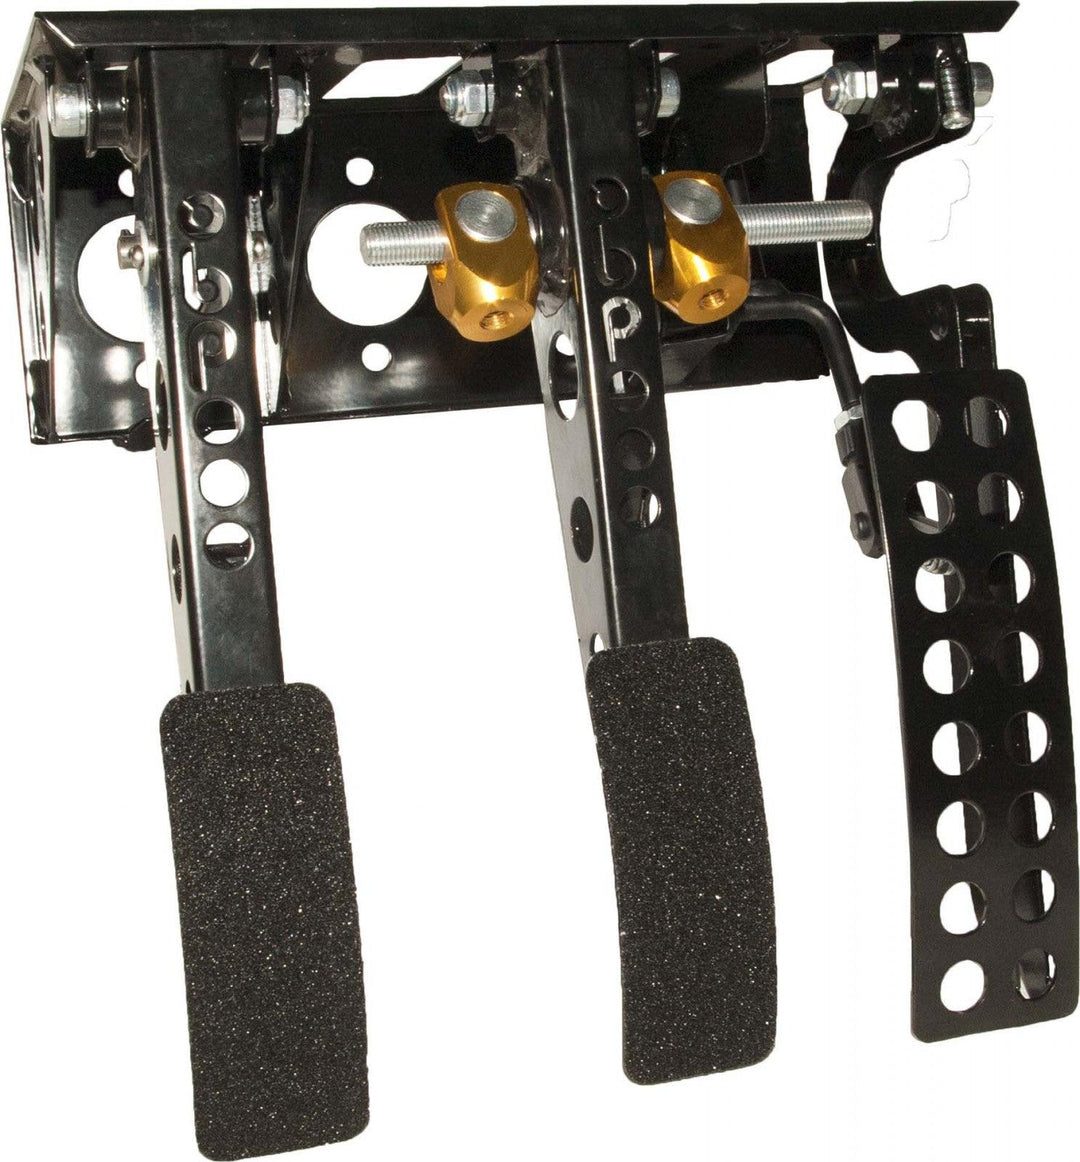 obp Motorsport Victory Top Mounted Bulkhead Fit 3 Pedal System - Attacking the Clock Racing